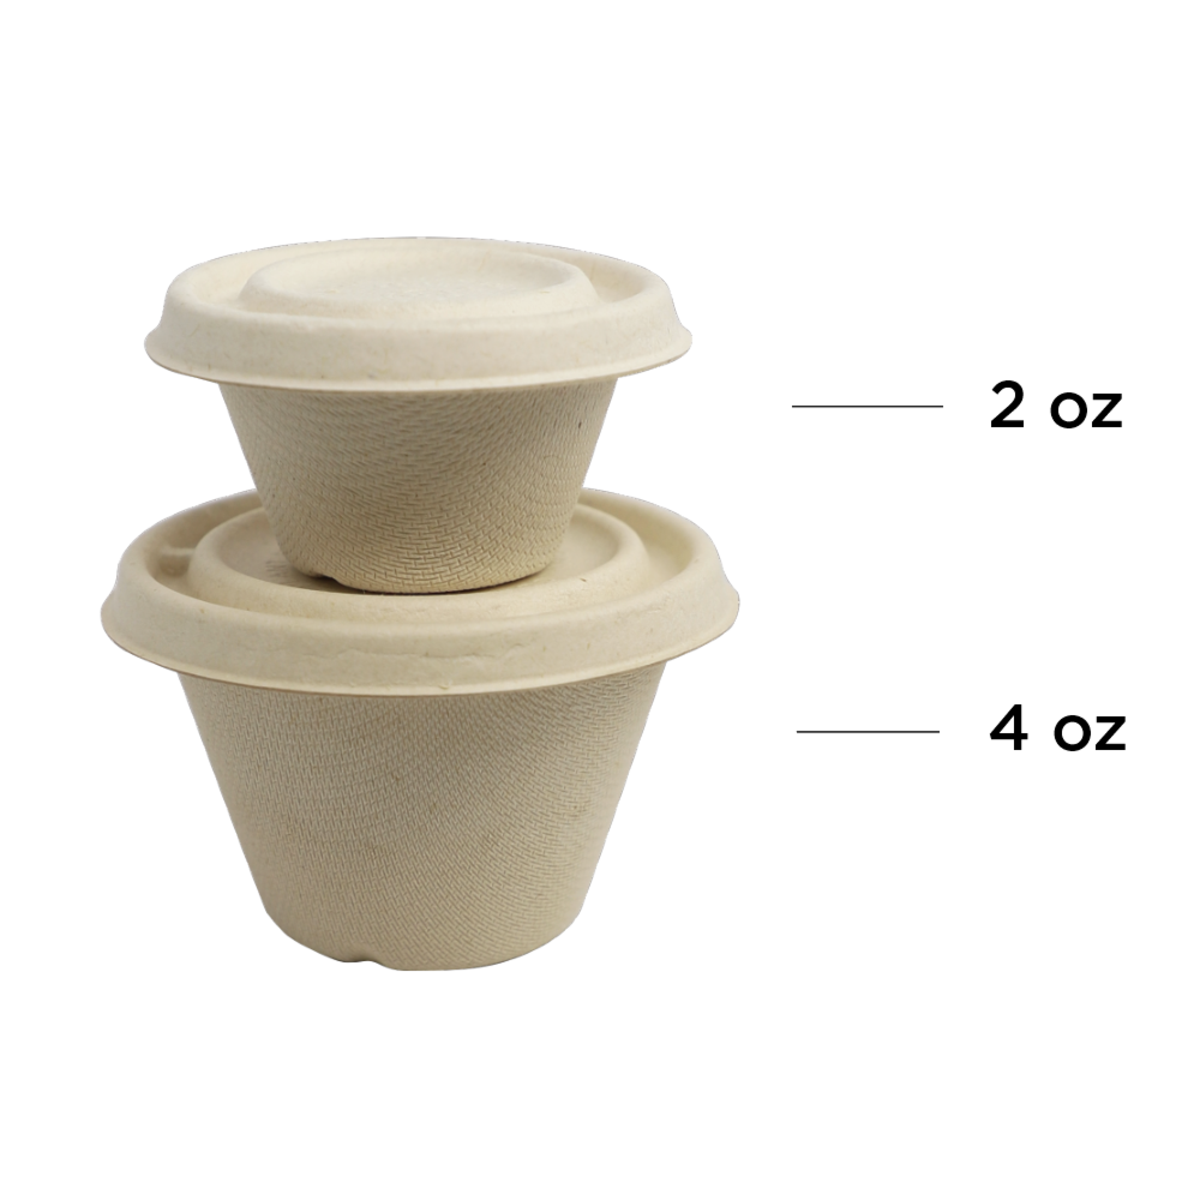 Sauce Cup With Lid - Compostable Sauce Container - Go-Compost